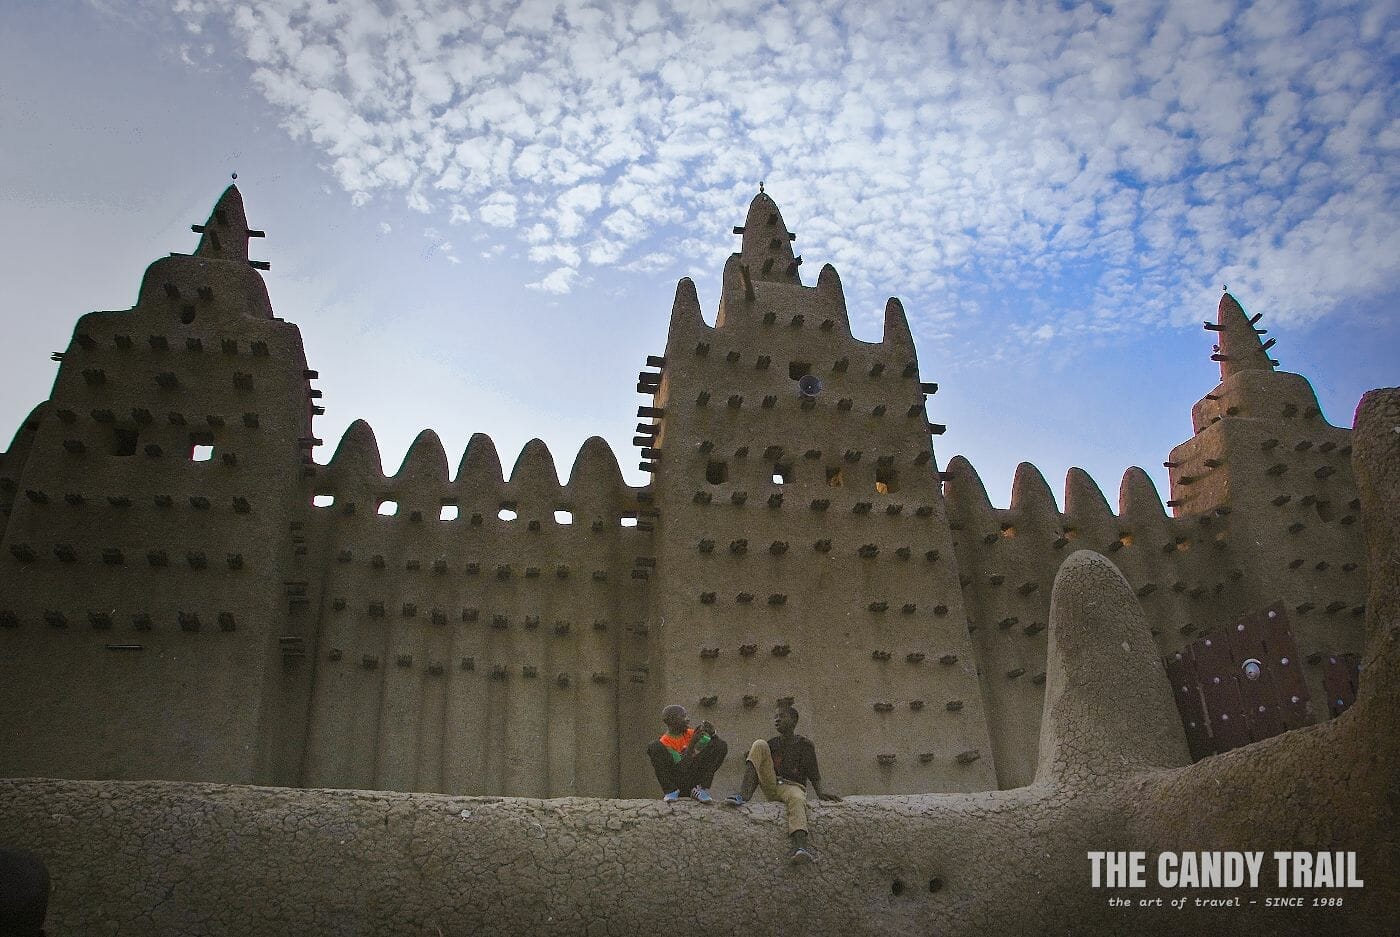 Boys chatting below the walls of the Great Mosque of Djenne.